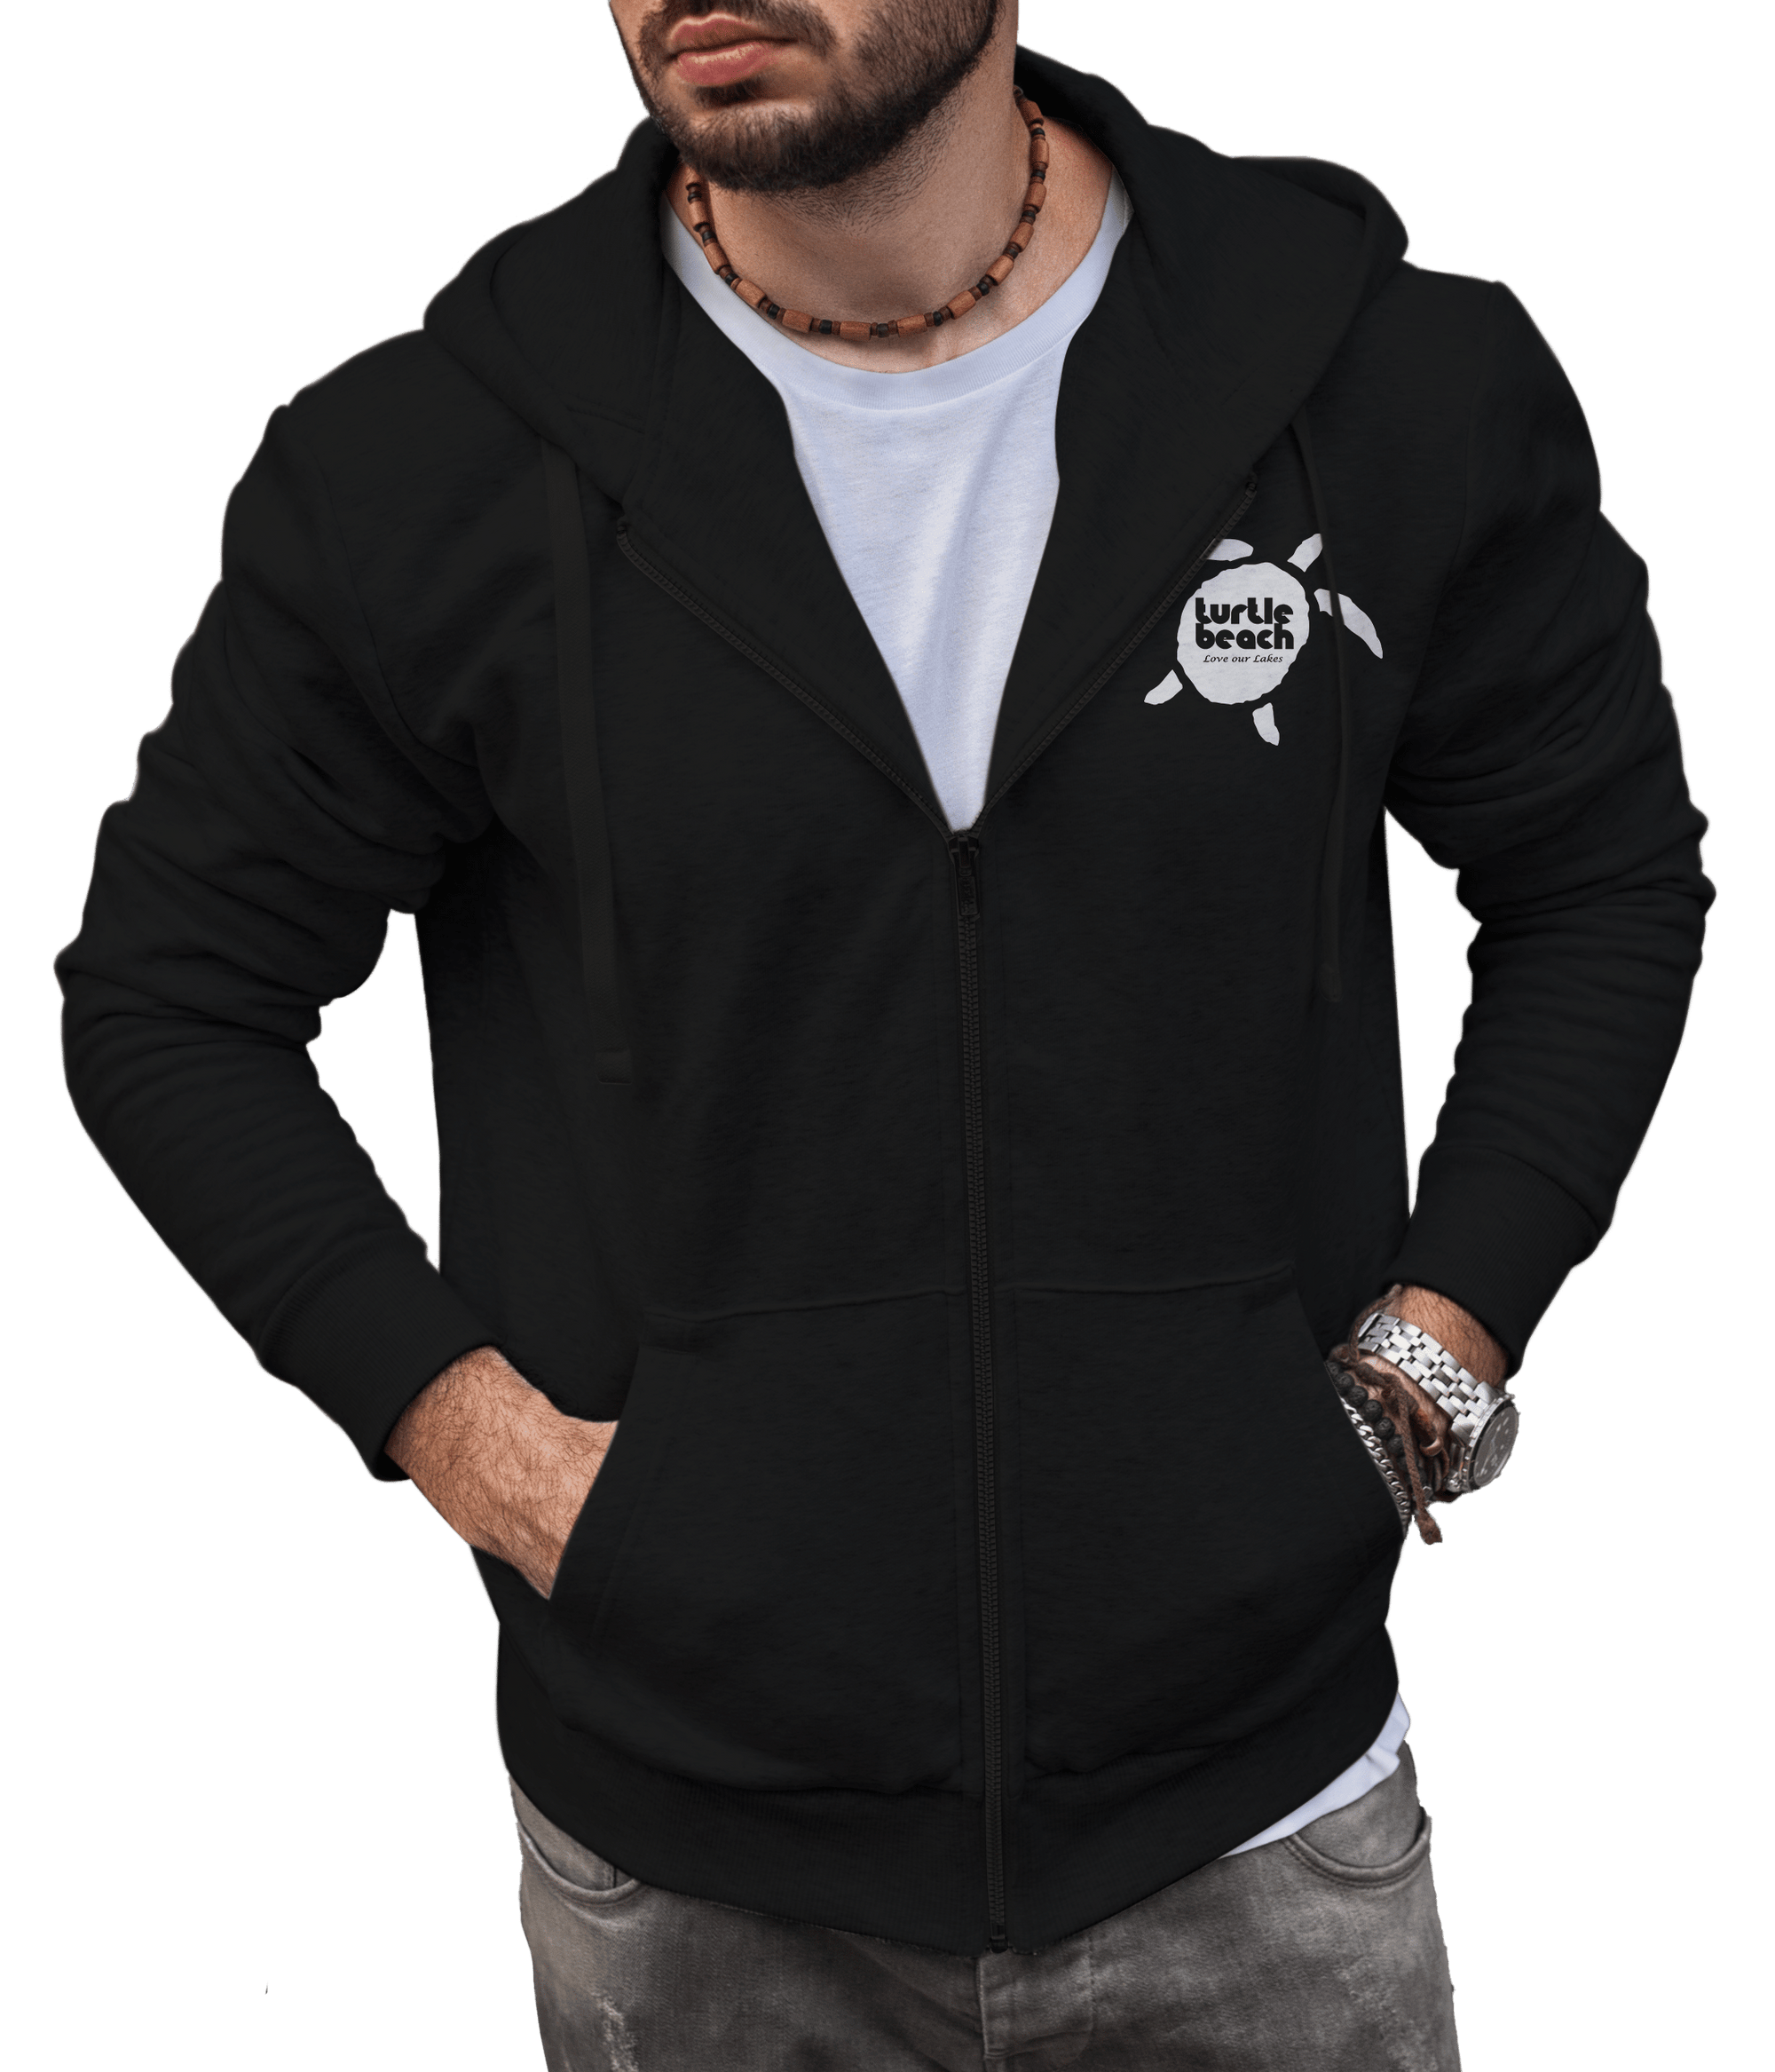 Turtle Beach Clothing zip up hoodie black Canadian made, 80% organic cotton